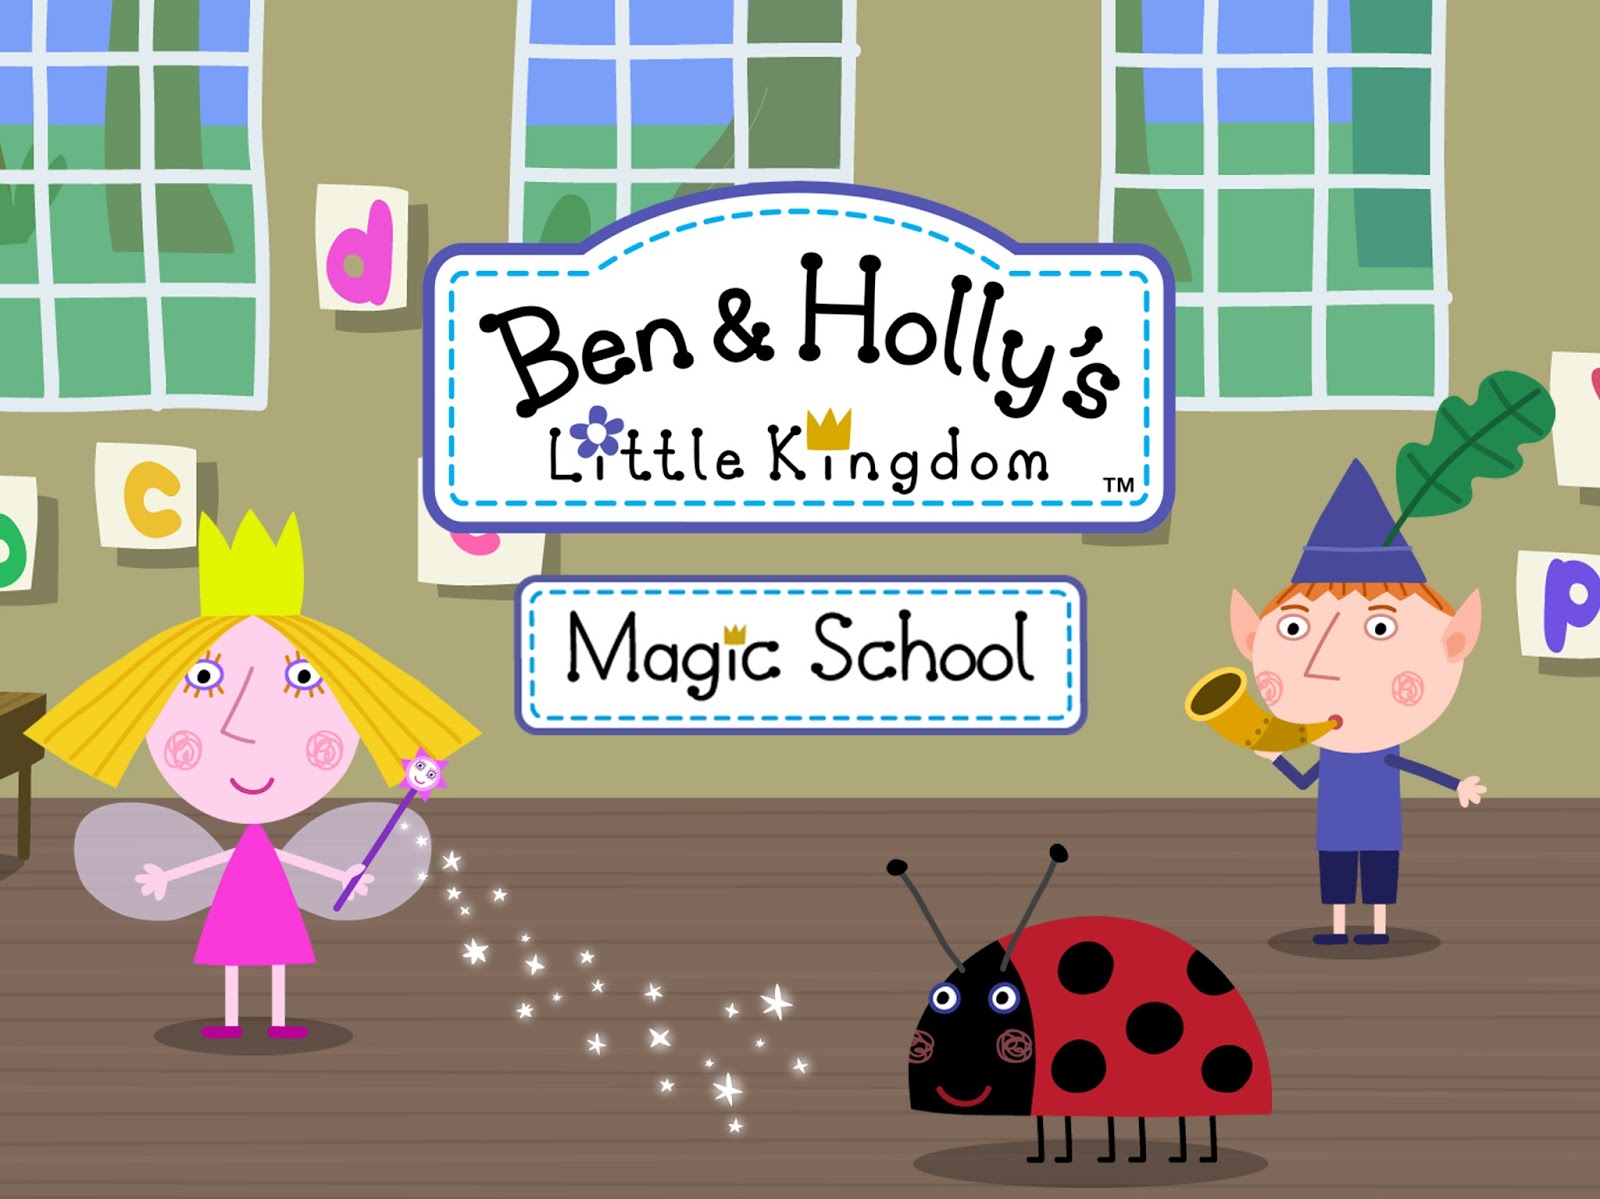 Игра бен и холли. Ben and Holly's little Kingdom the Elf School. Ben and Holly Magic School game. Ben and Holly game Android. Игра Бен и Холли магия Холли.